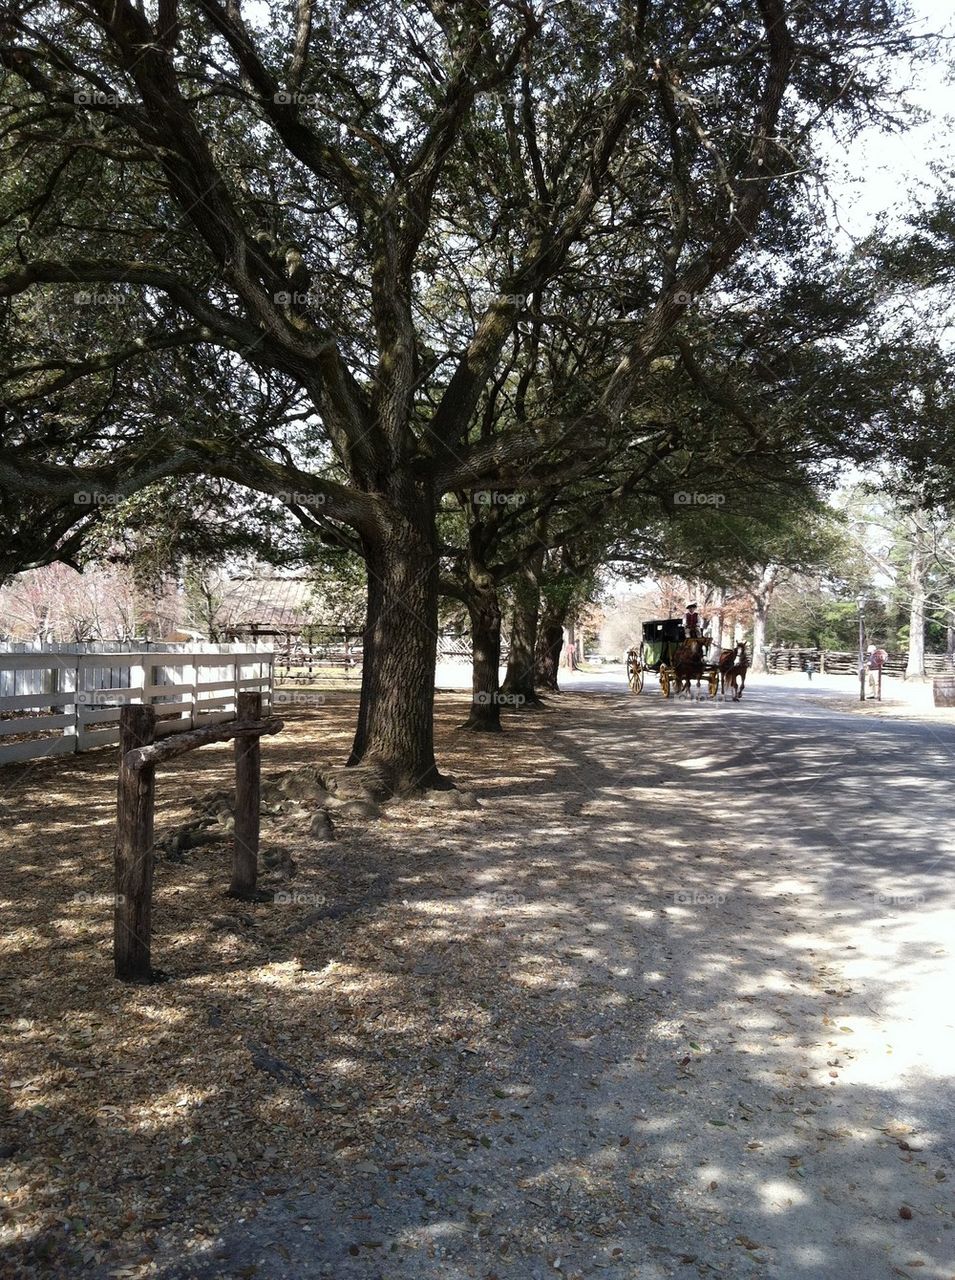 Live oak and carriage